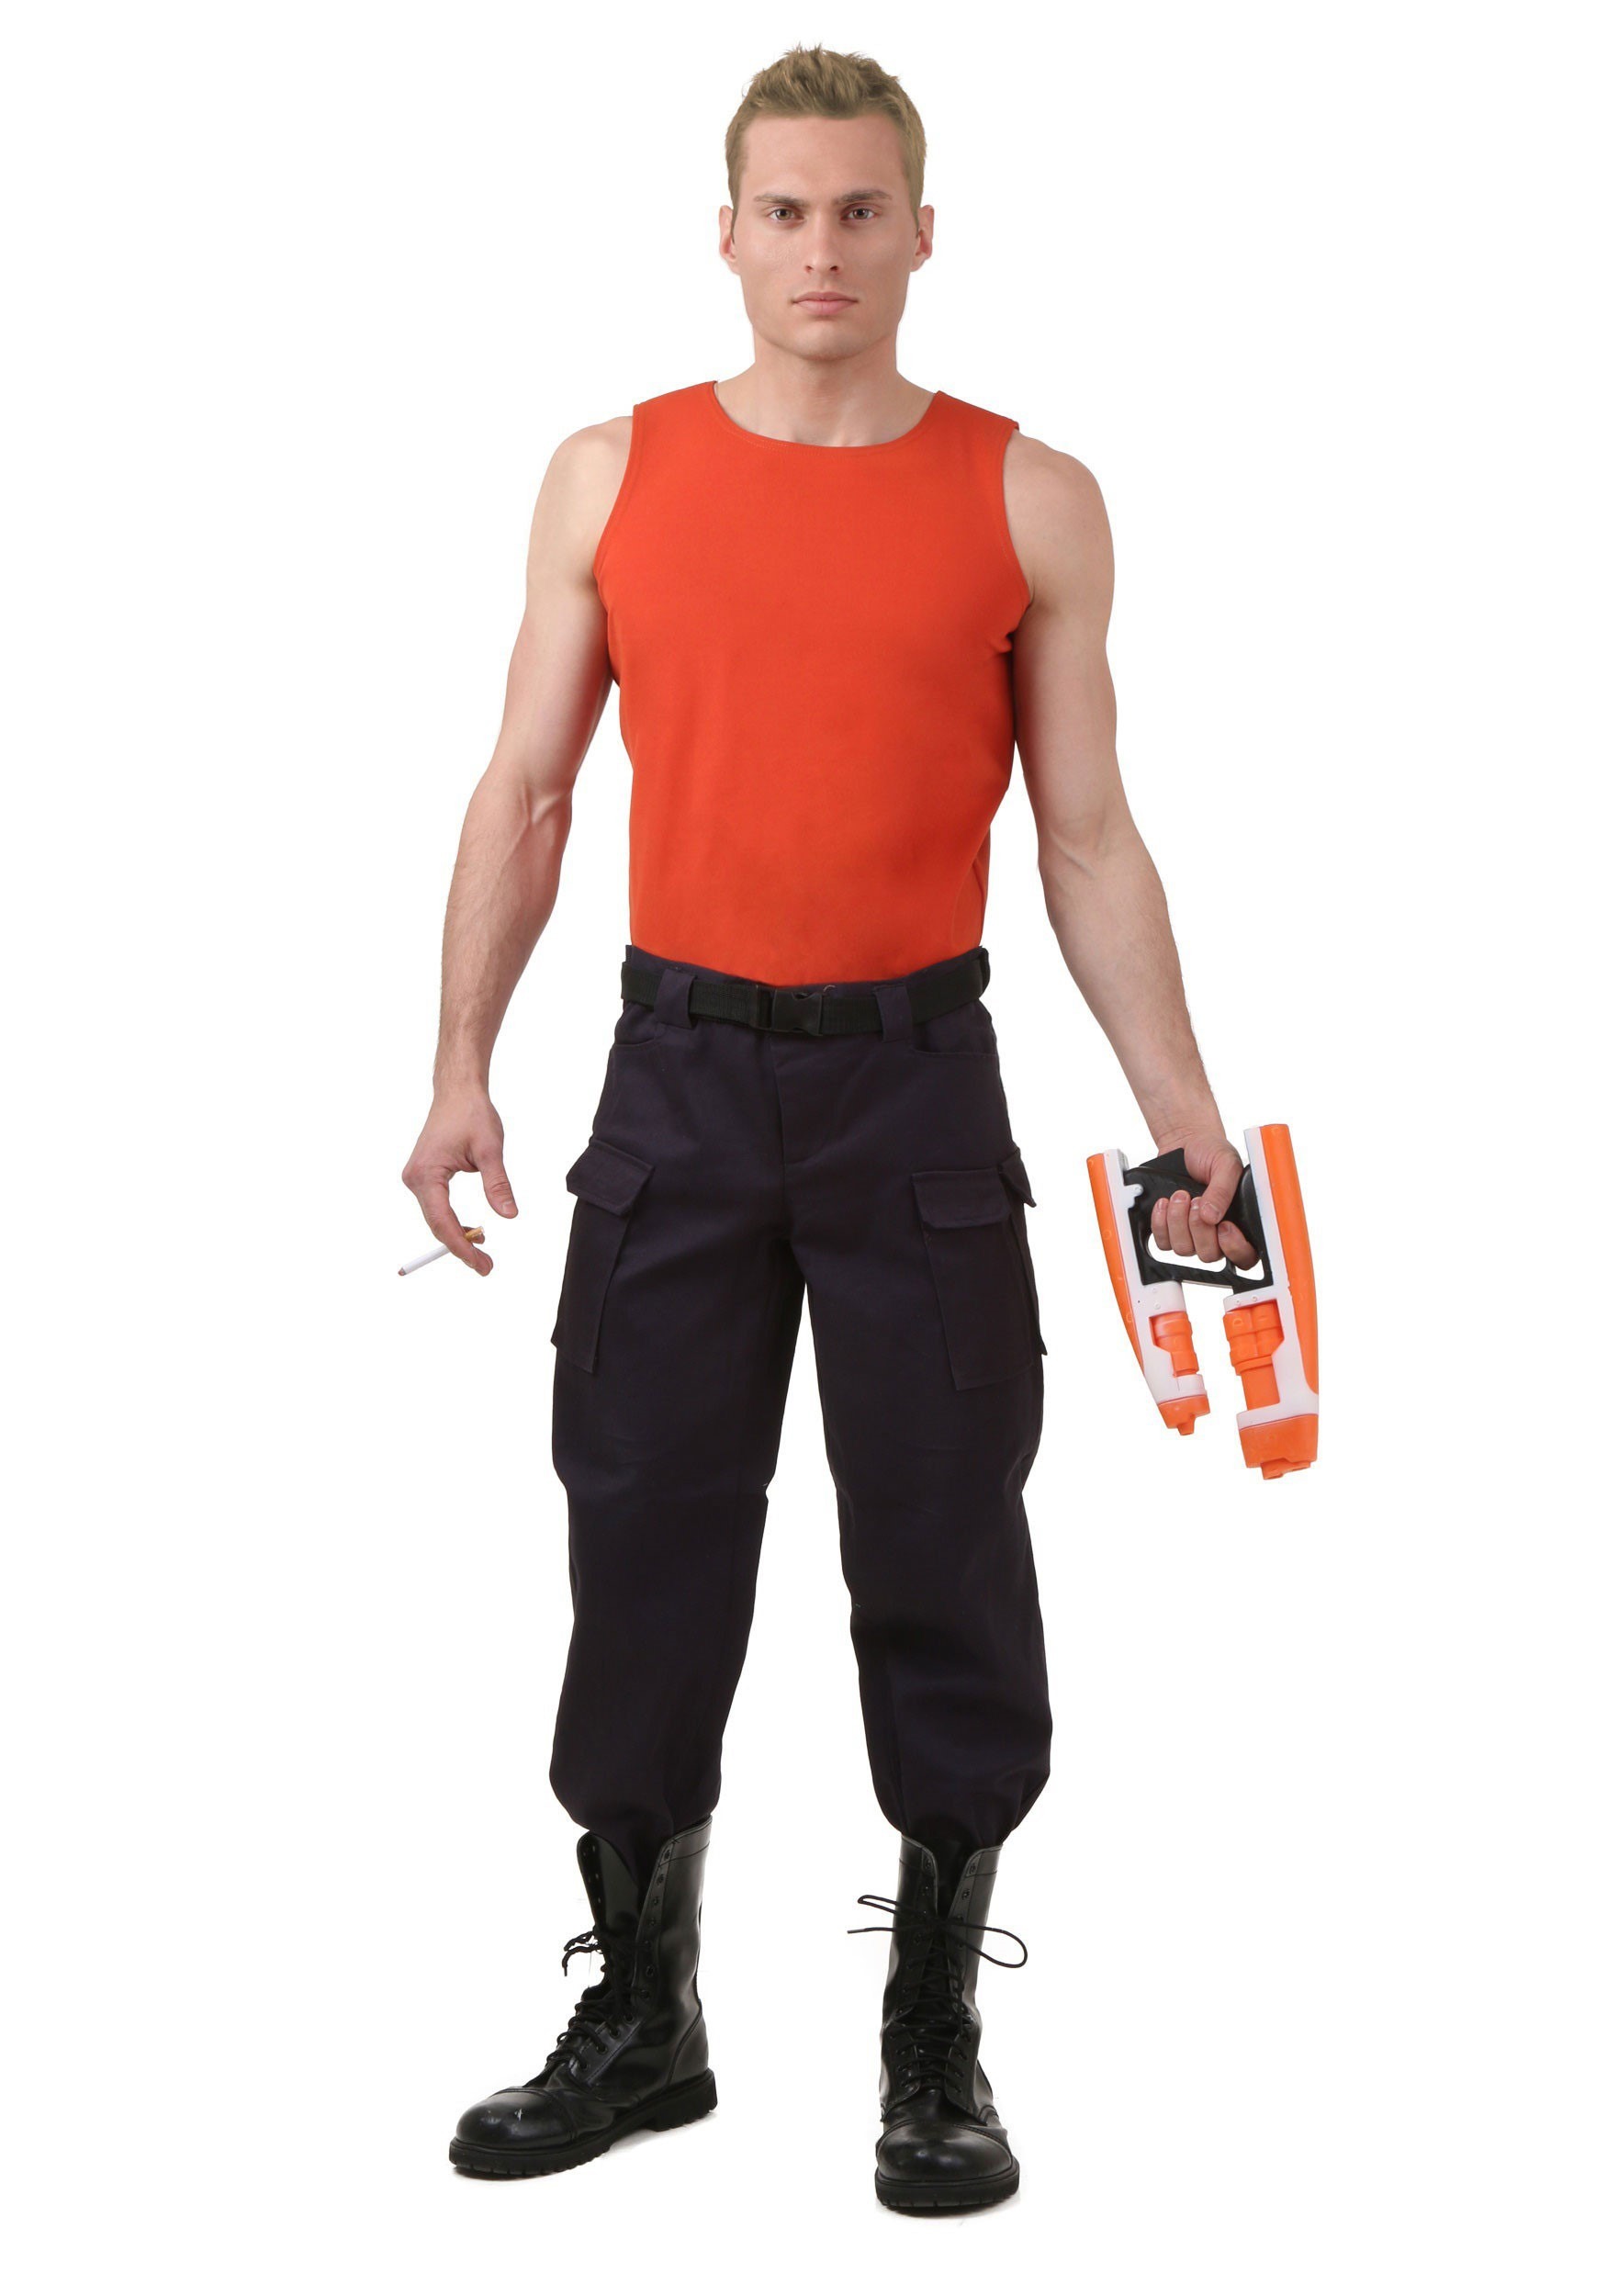 Korben Dallas Mens Costume from Fifth Element